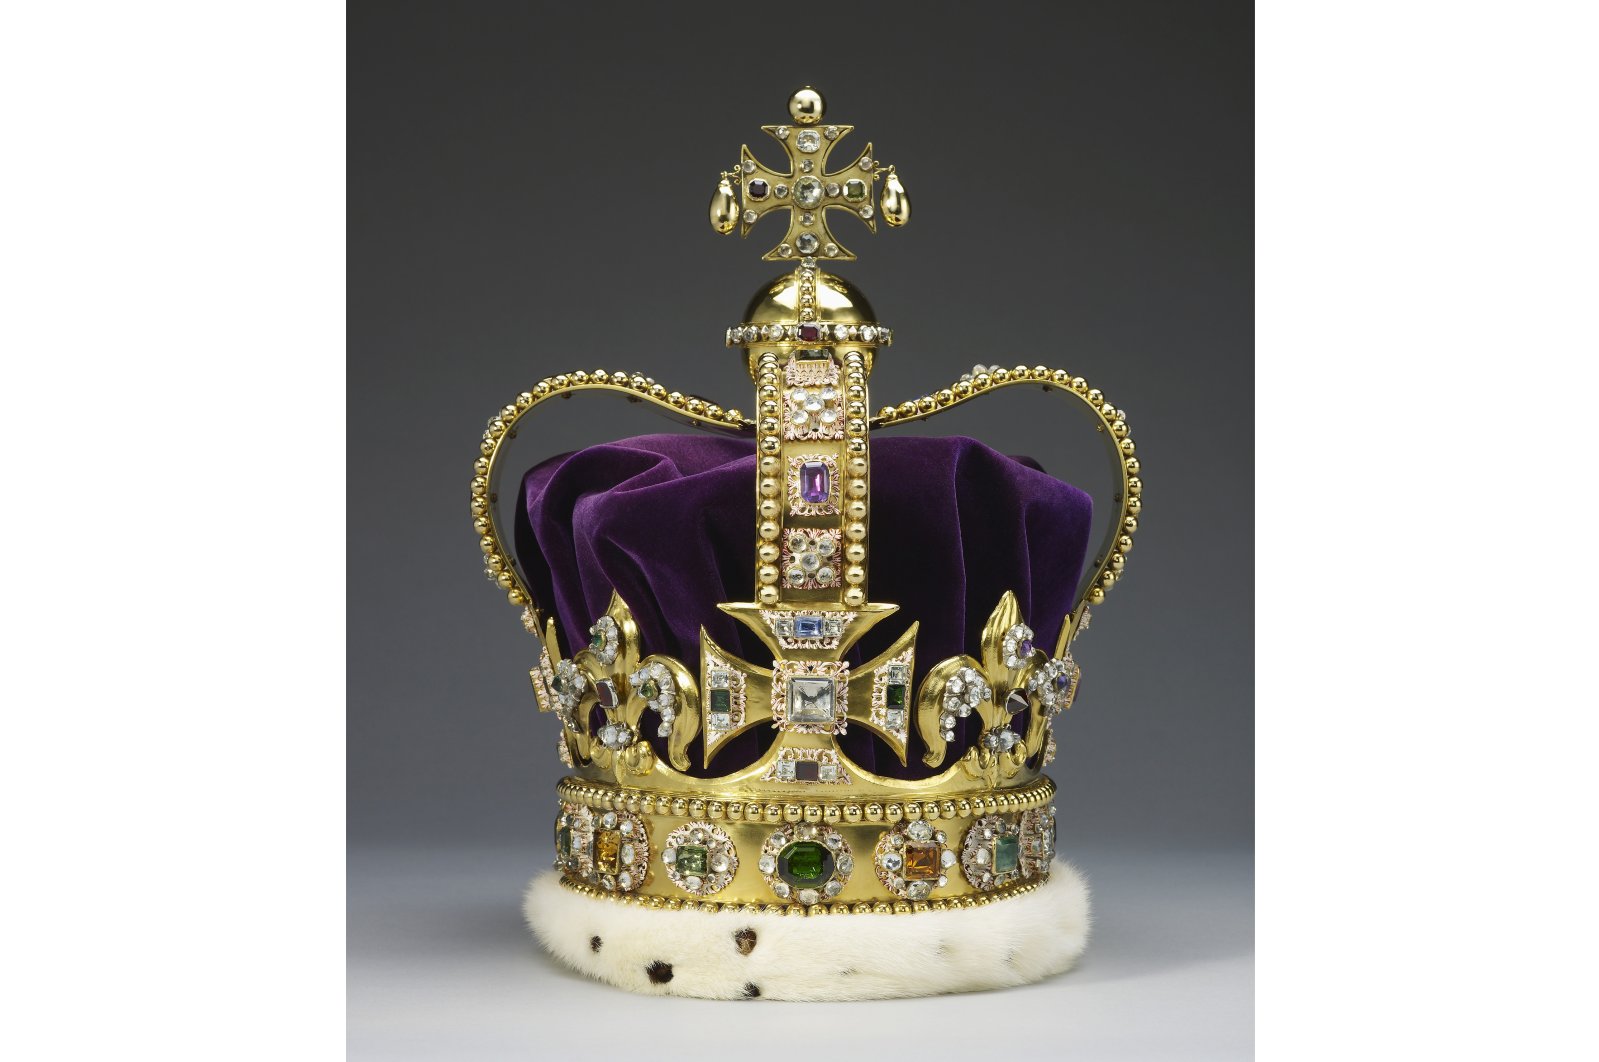 St. Edward&#039;s Crown will be worn by King Charles III on his coronation on May 6, 2023. (AP Photo)